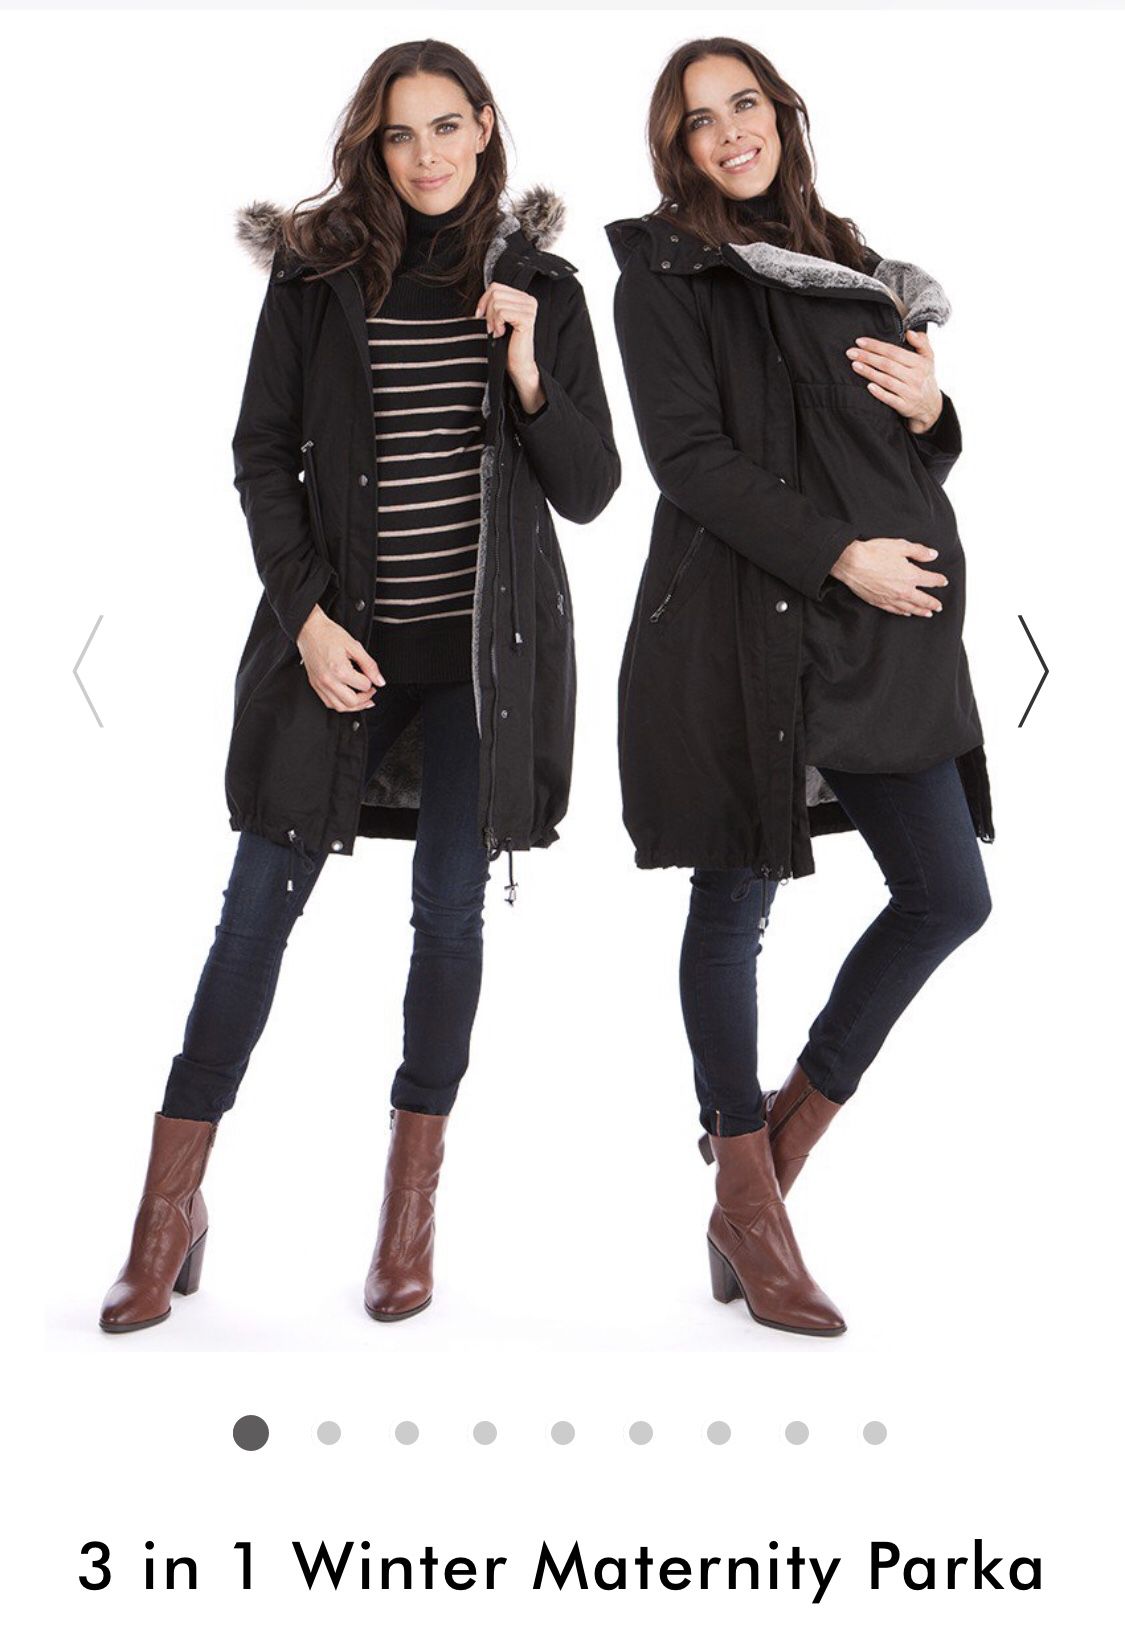 Seraphine 3 in 1 Maternity Parka- kangaroo cover included , size 10, MSRP $265